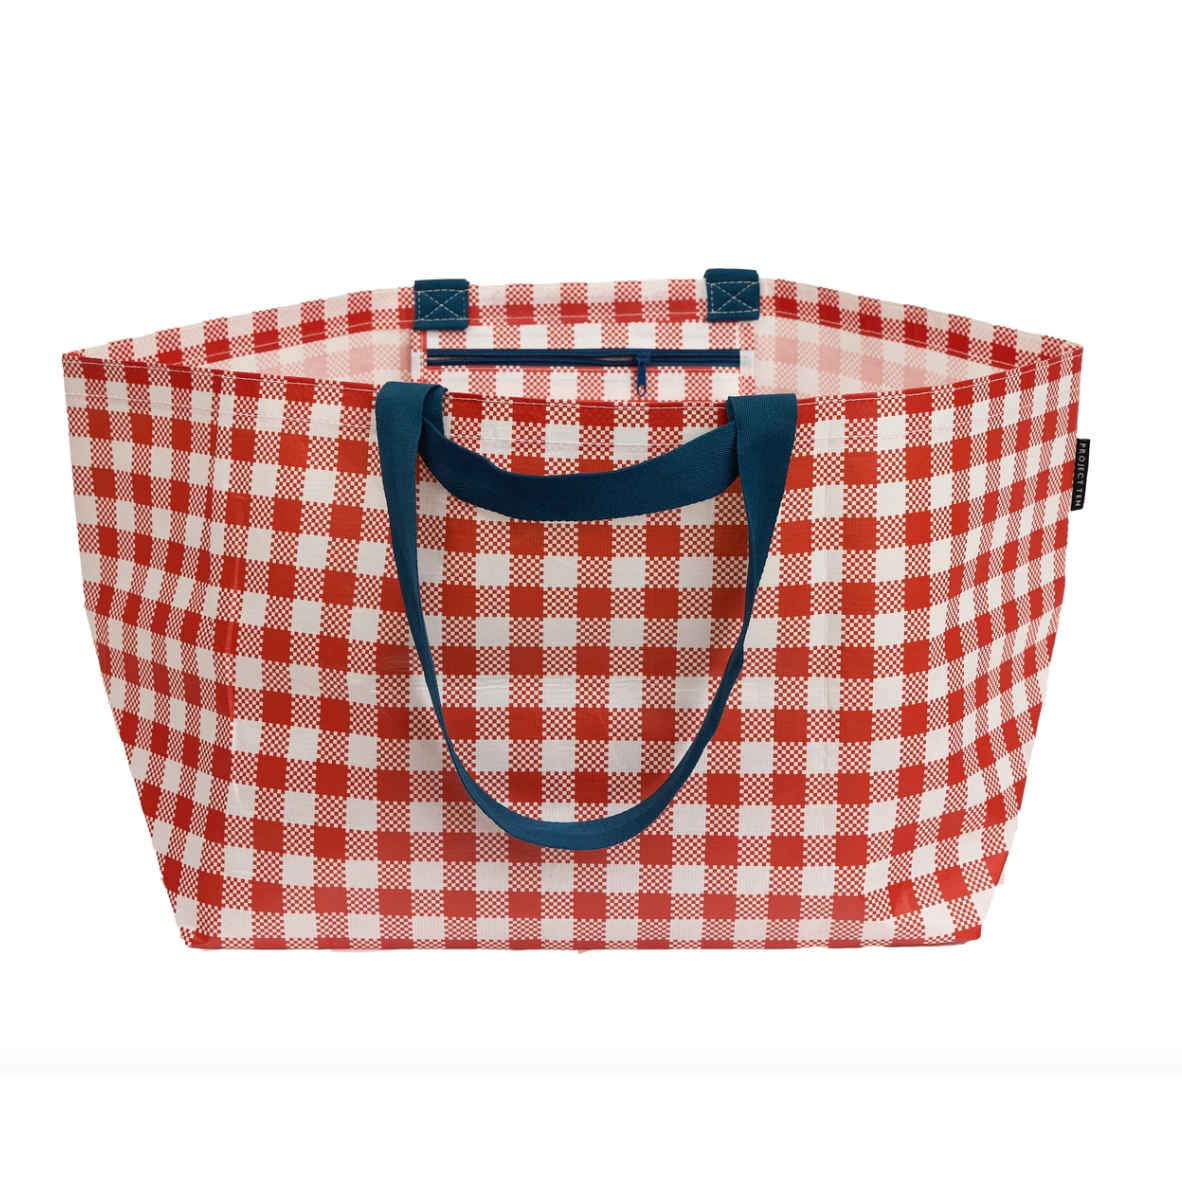 Project Ten Oversize Tote